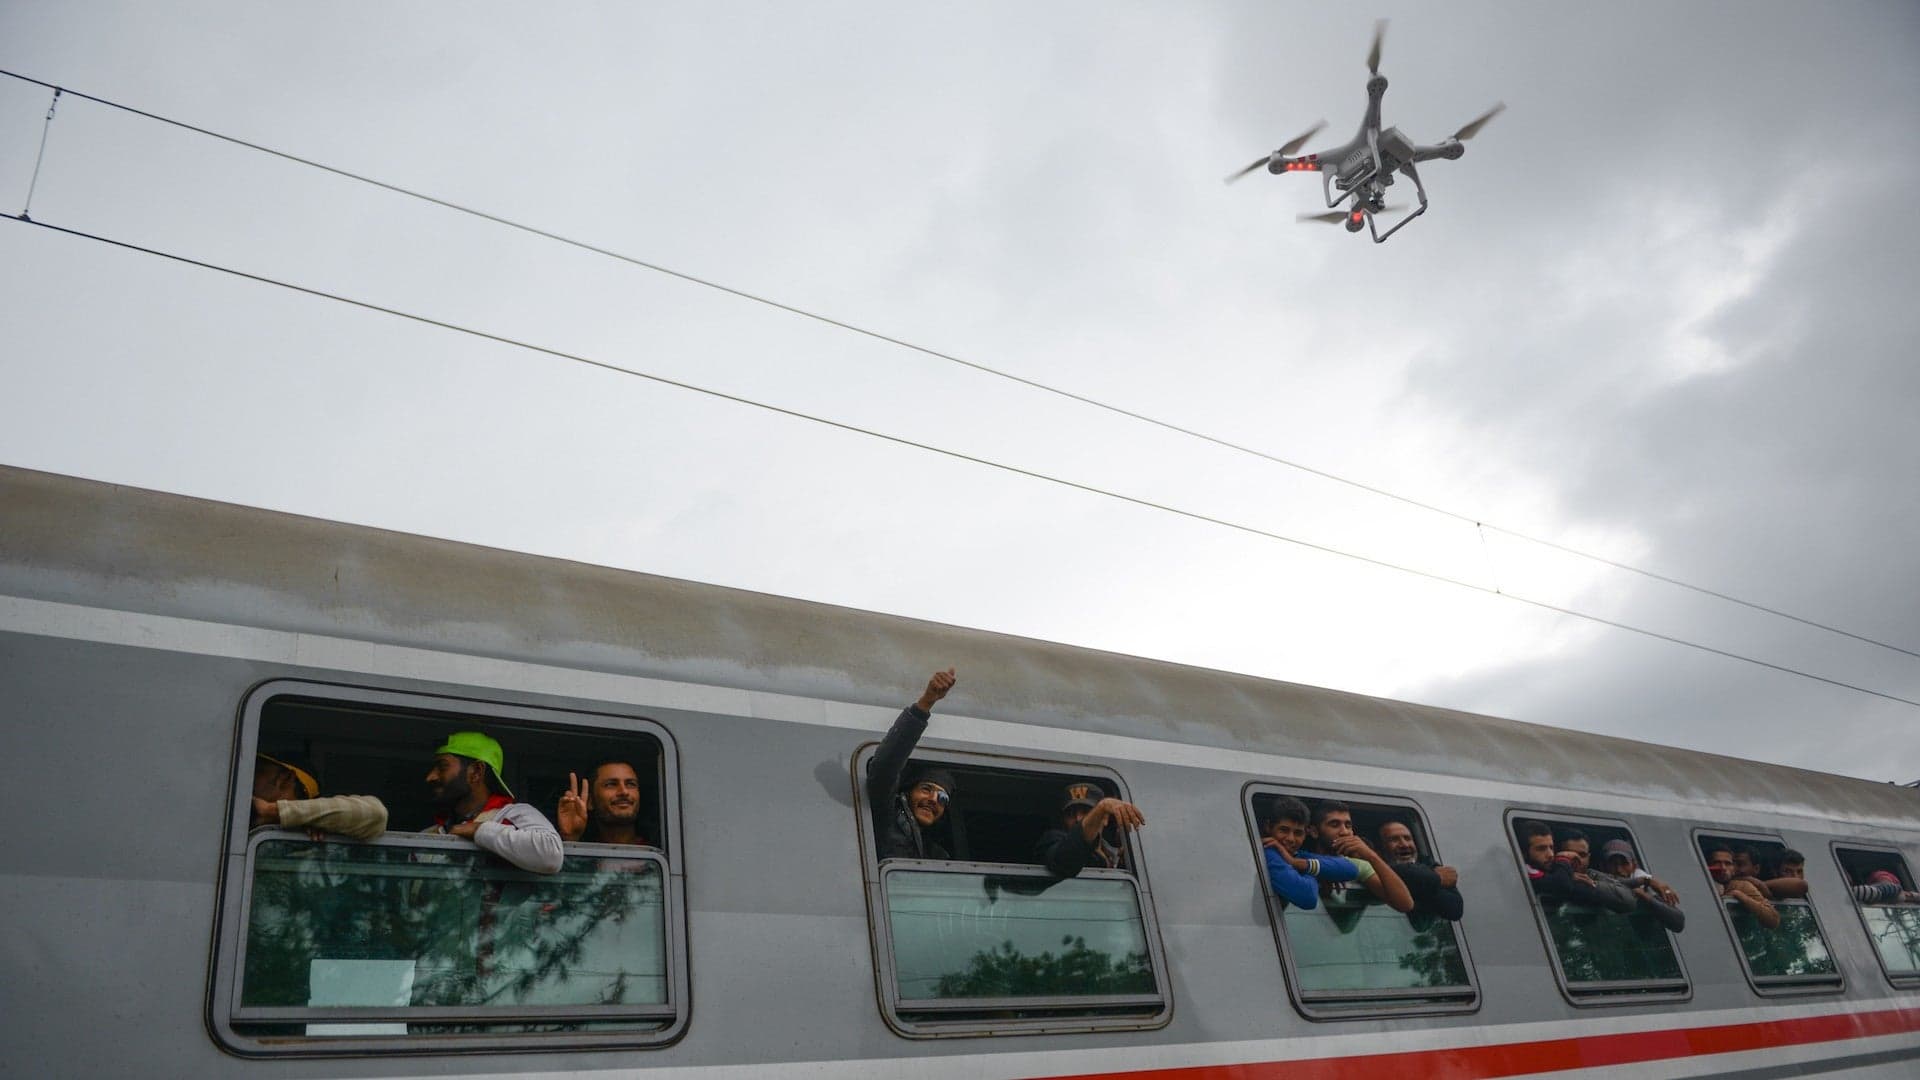 Union Pacific is Using Drones to Monitor Railroad Employee Safety